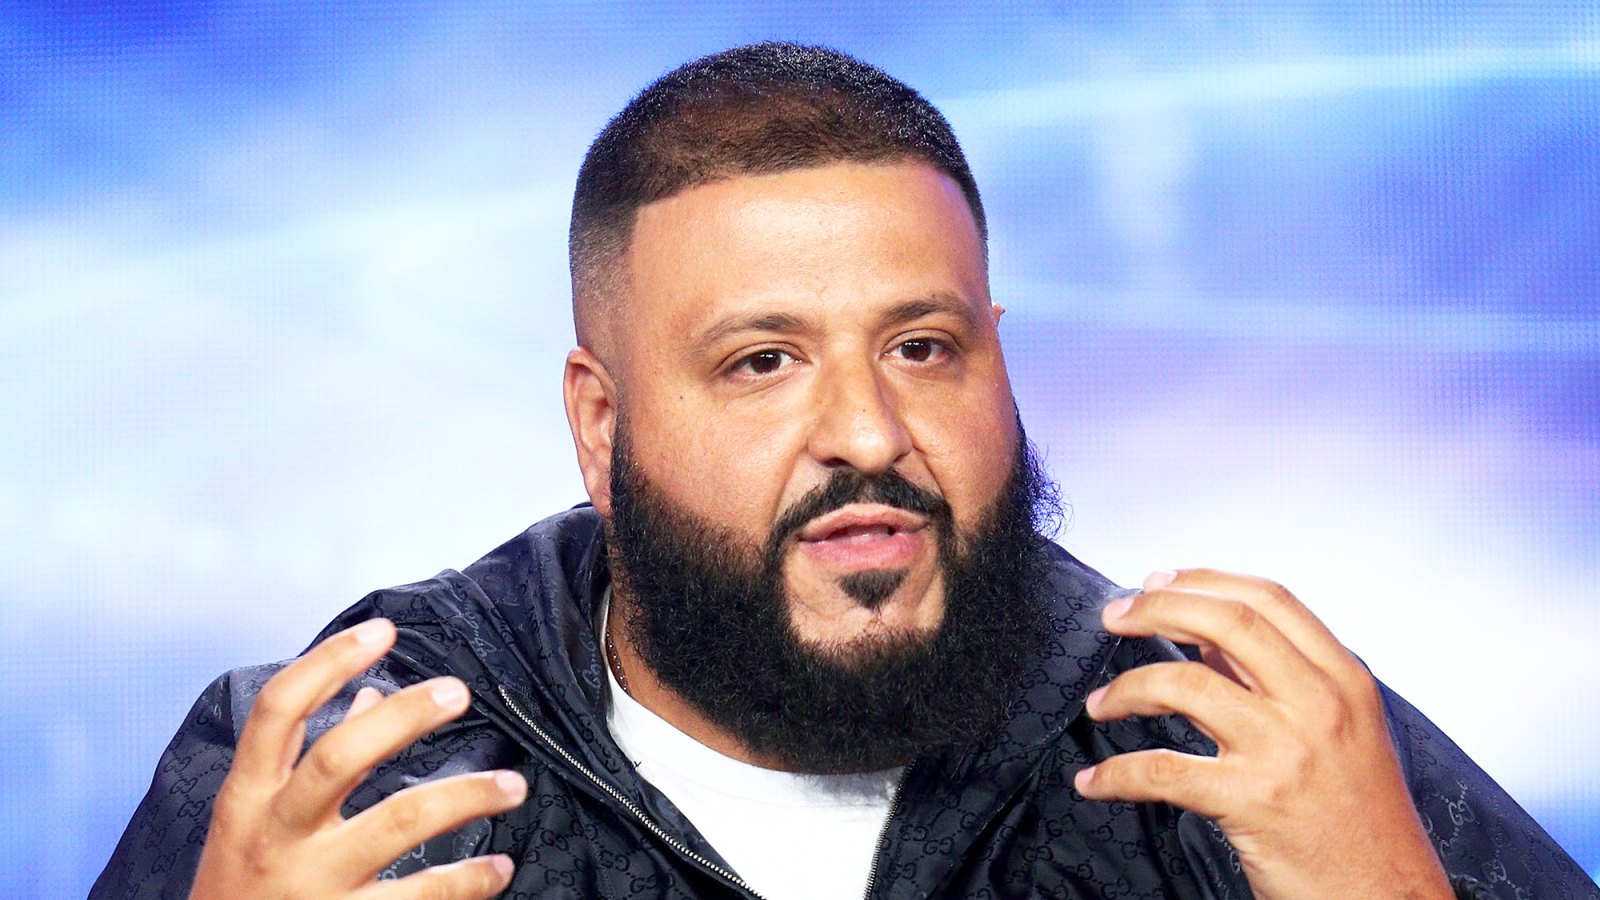 DJ Khaled during The Four onstage during the FOX portion of the 2018 Winter Television Critics Association Press Tour in Pasadena, California.